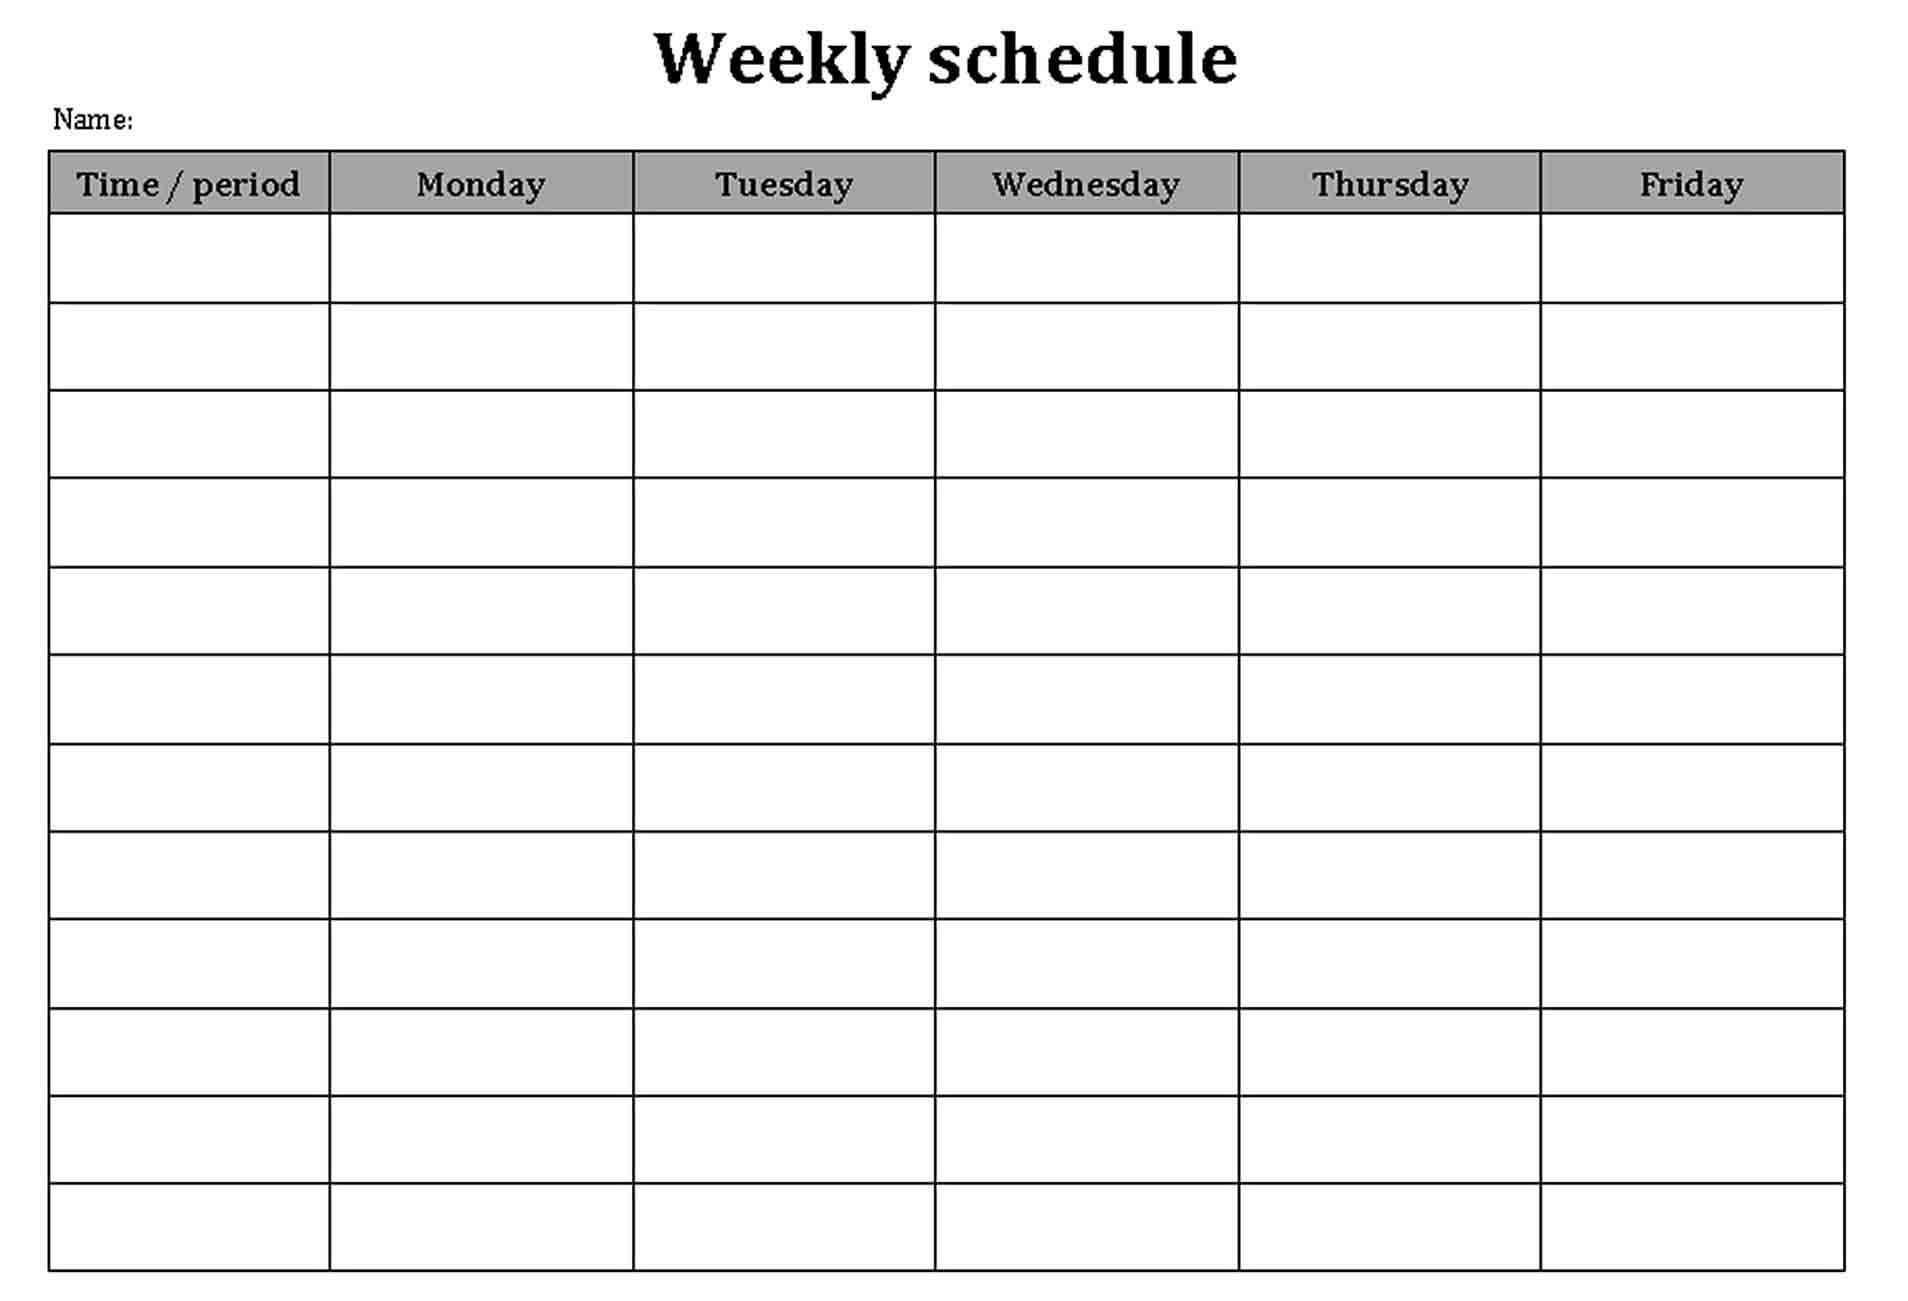 Free Weekly Schedule Template in Word Format